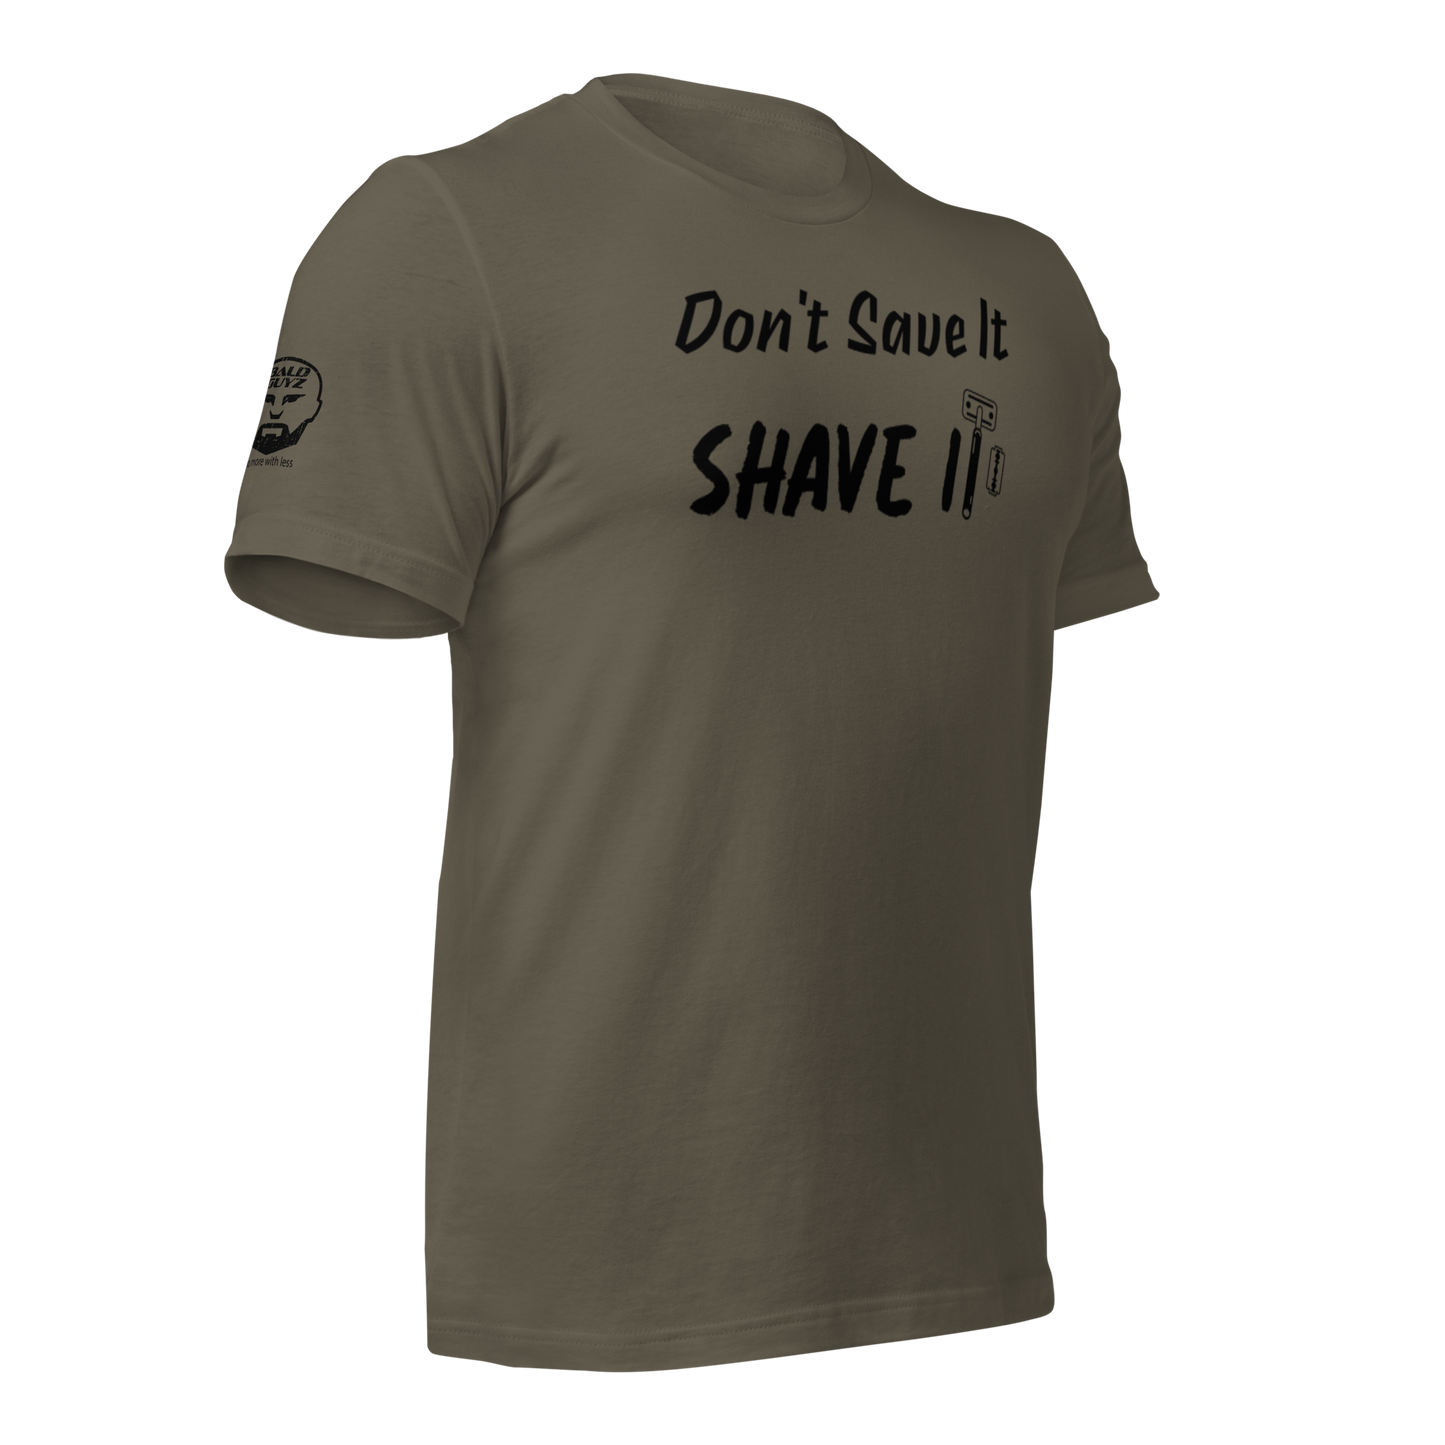 Don't Save It Shave It t-shirt